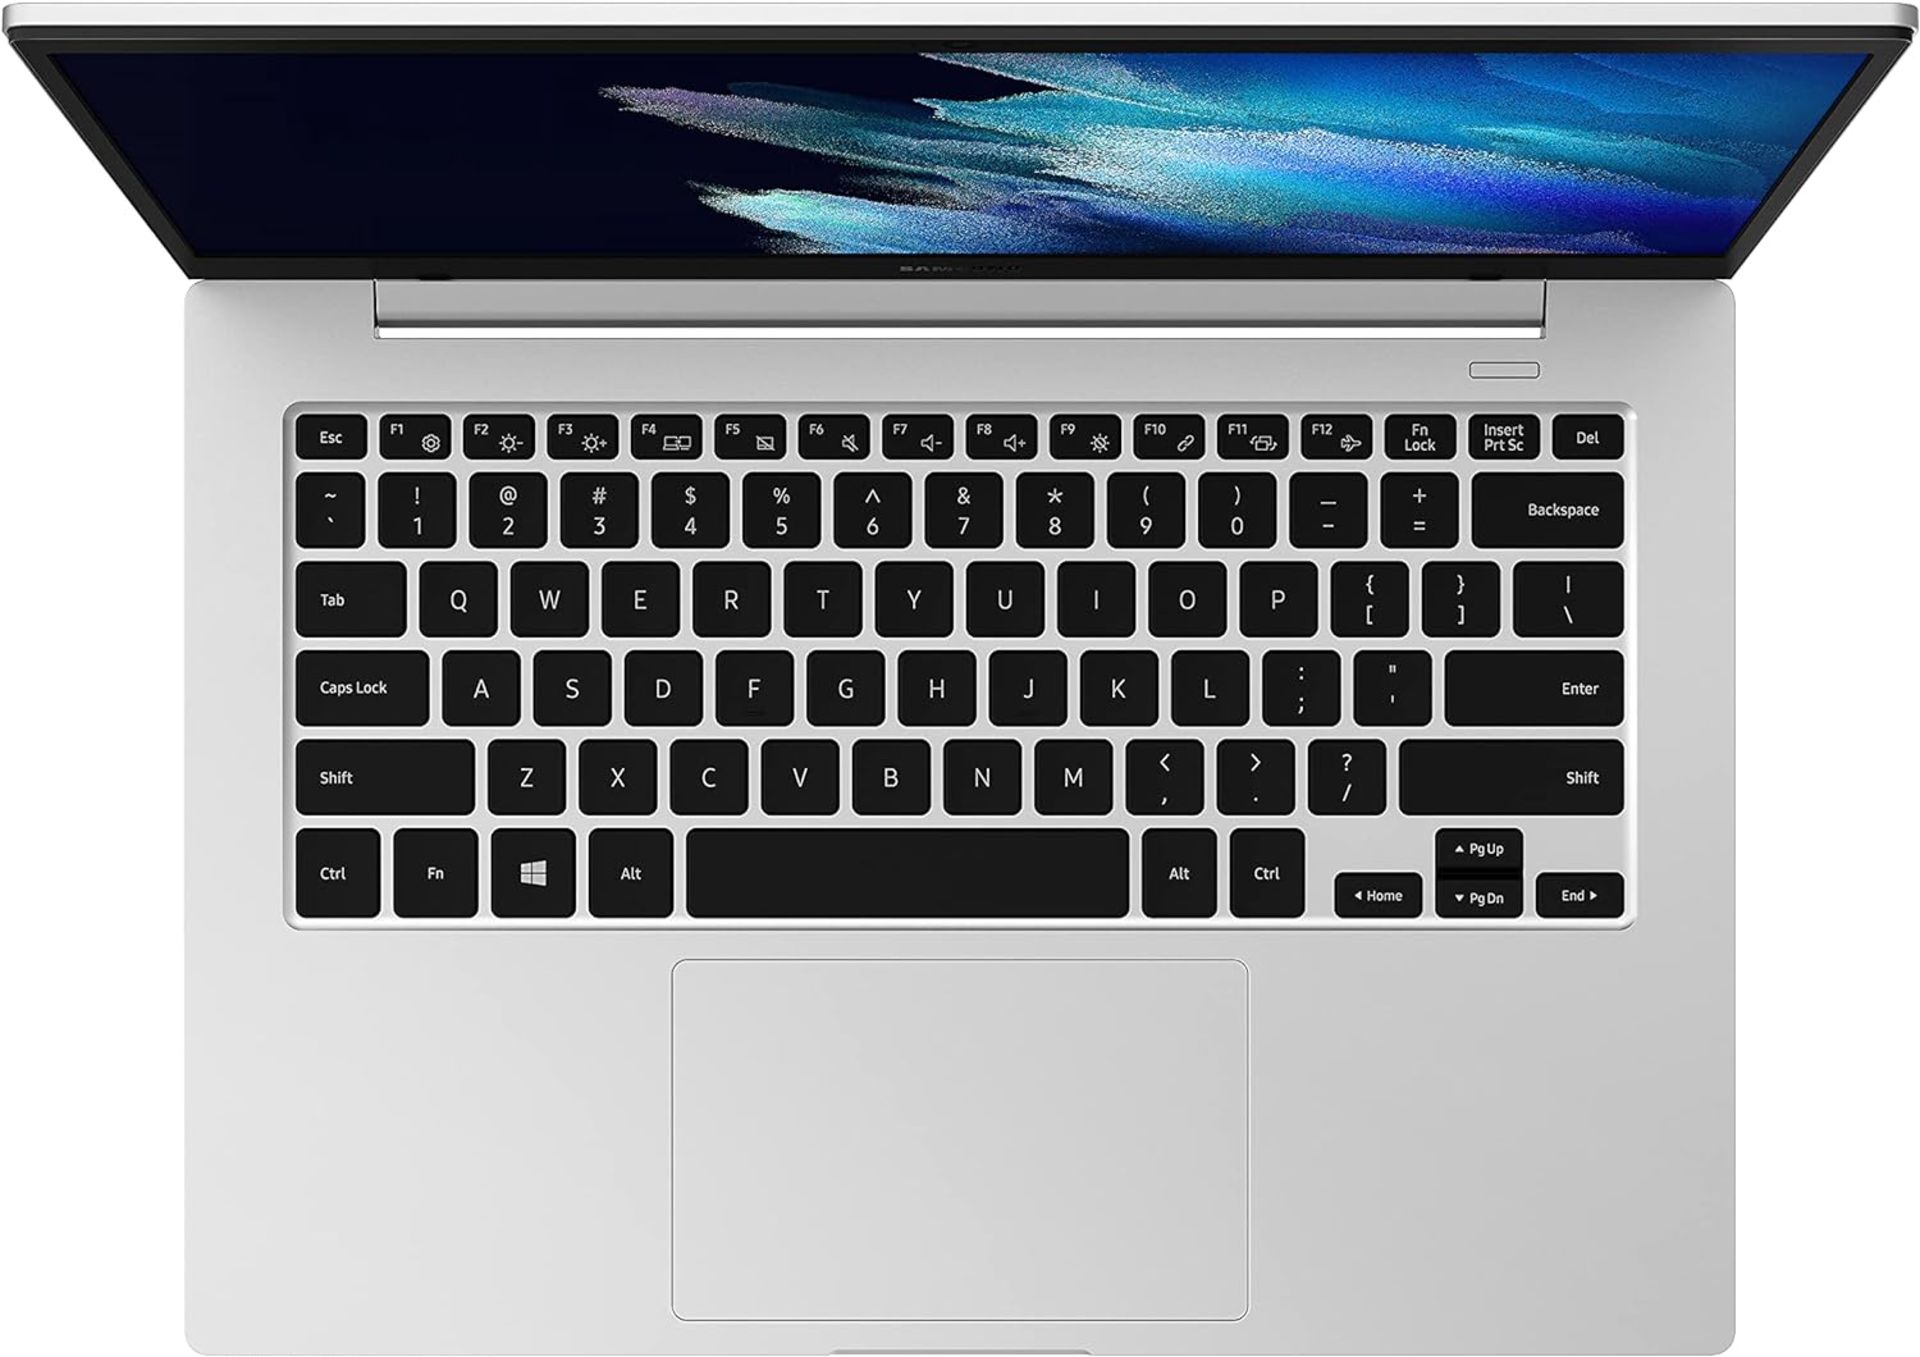 BRAND NEW FACTORY SEALED SAMSUNG Galaxy Book Go 345XLA-KB1 14 Inch Laptop. RRP £399. (CGE). - Image 7 of 7